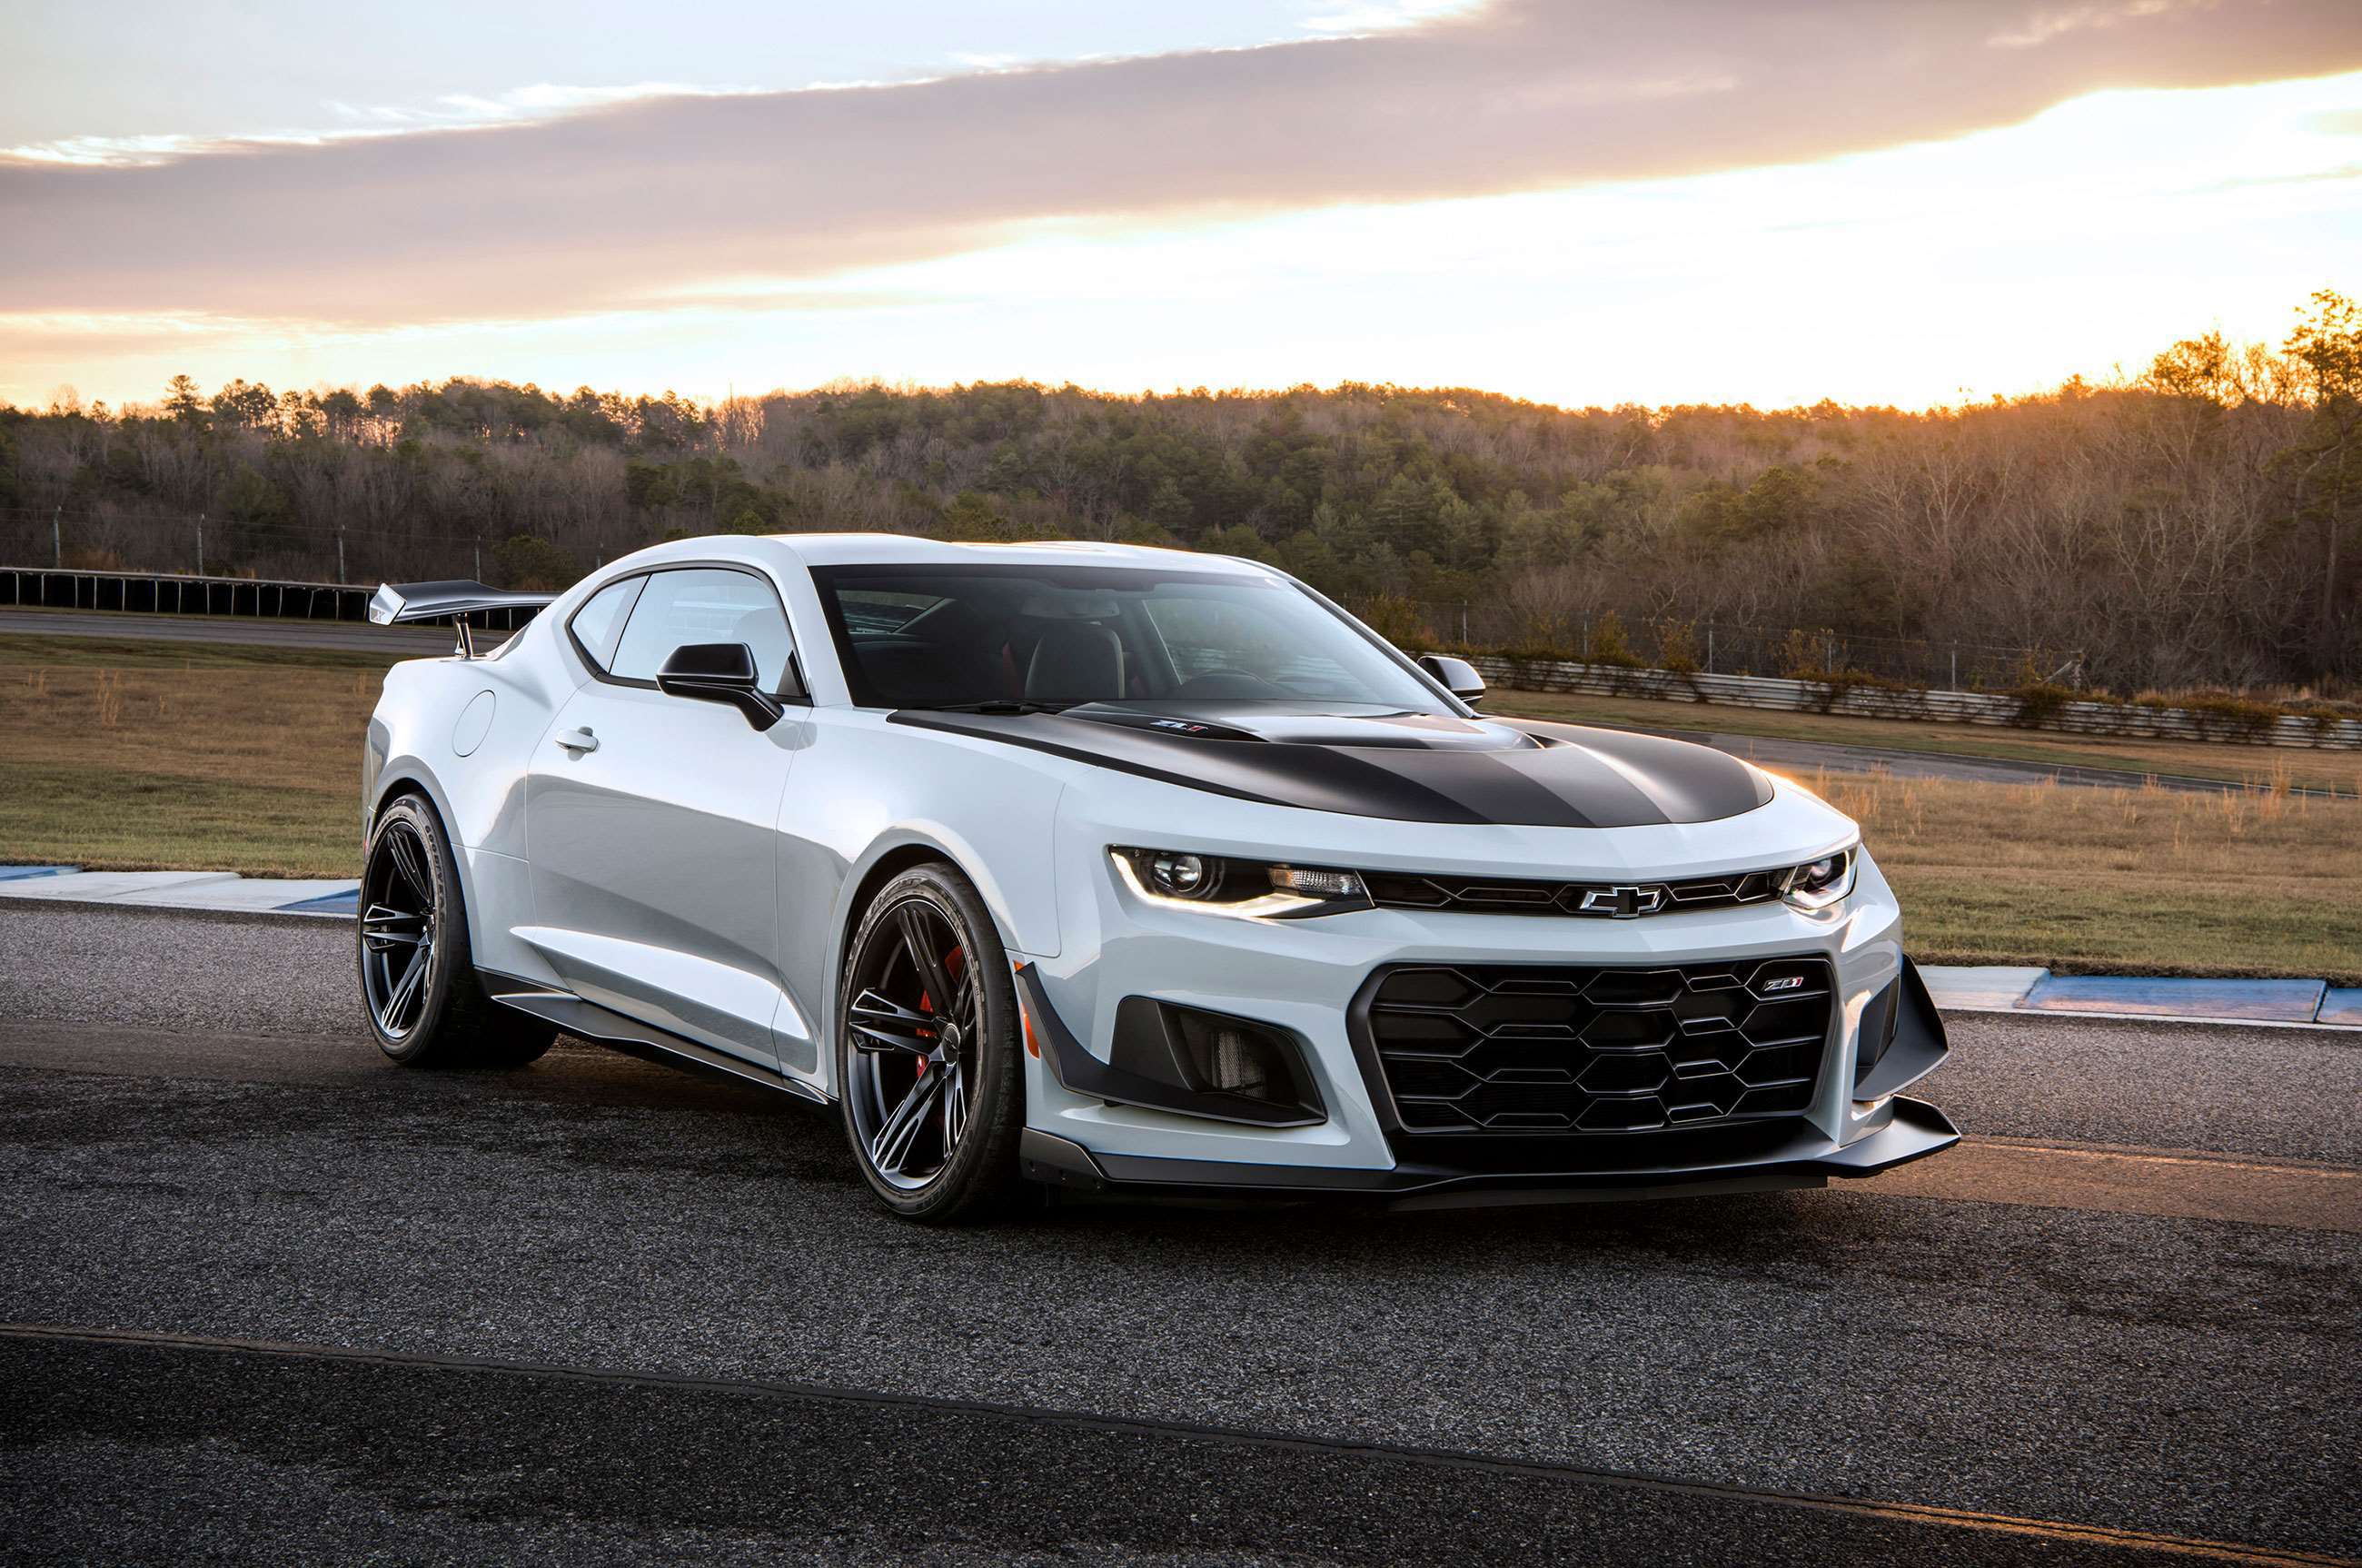 best-muscle-cars-for-2020-1-chevrolet-camaro-zl1-1le-goodwood-26052020.jpg